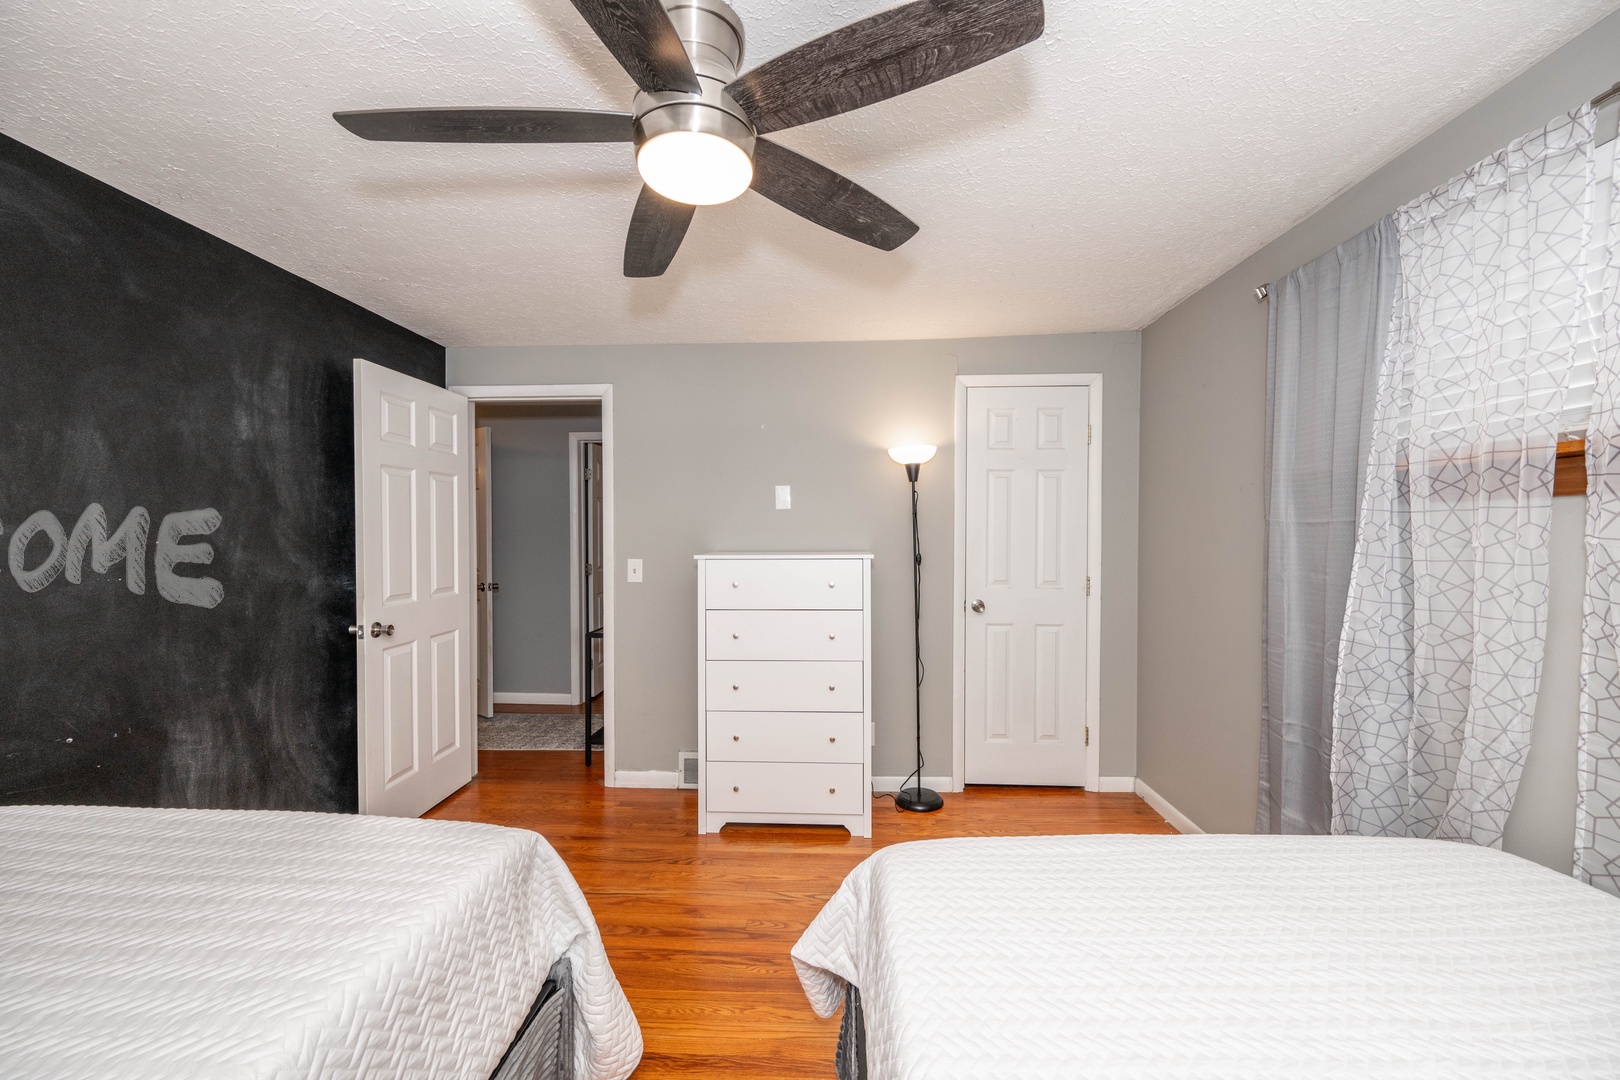 The final bedroom includes a pair of cozy full-sized beds & ceiling fan